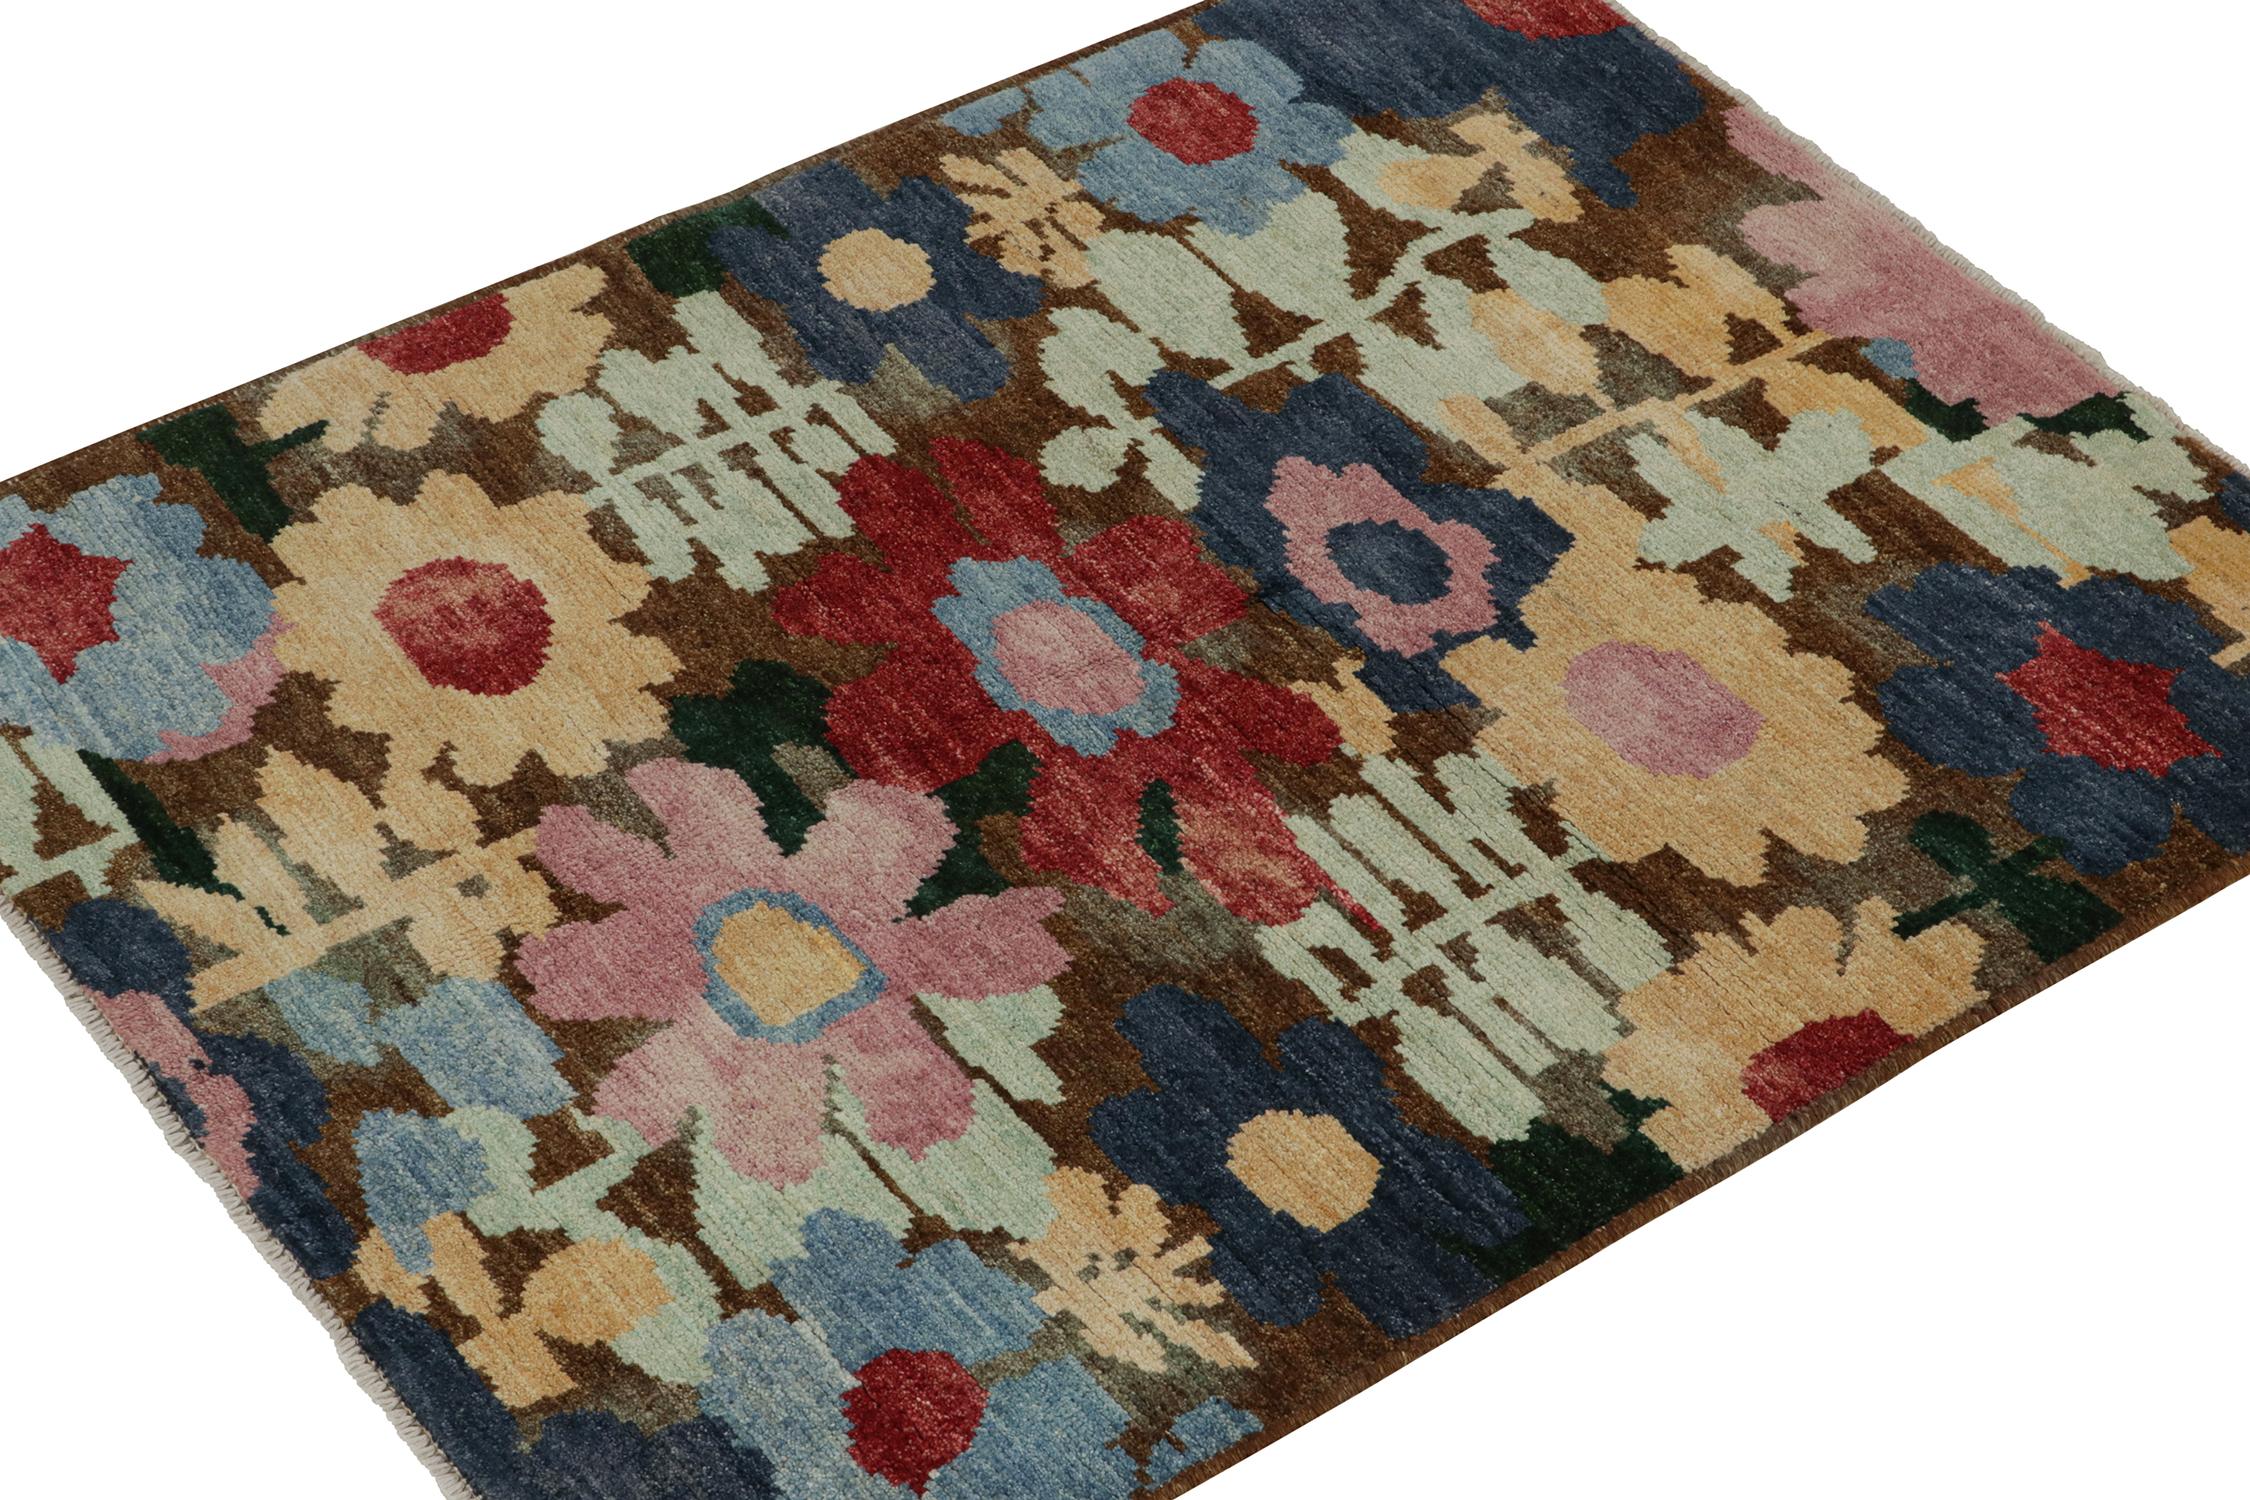 Hand-knotted in wool, a 4x5 contemporary rug from the latest unveilings of Rug & Kilim’s New & Modern Collection. 

On the Design: This refreshing piece enjoys multicolor florals in a playful, painterly take on botanical designs. The beautiful play